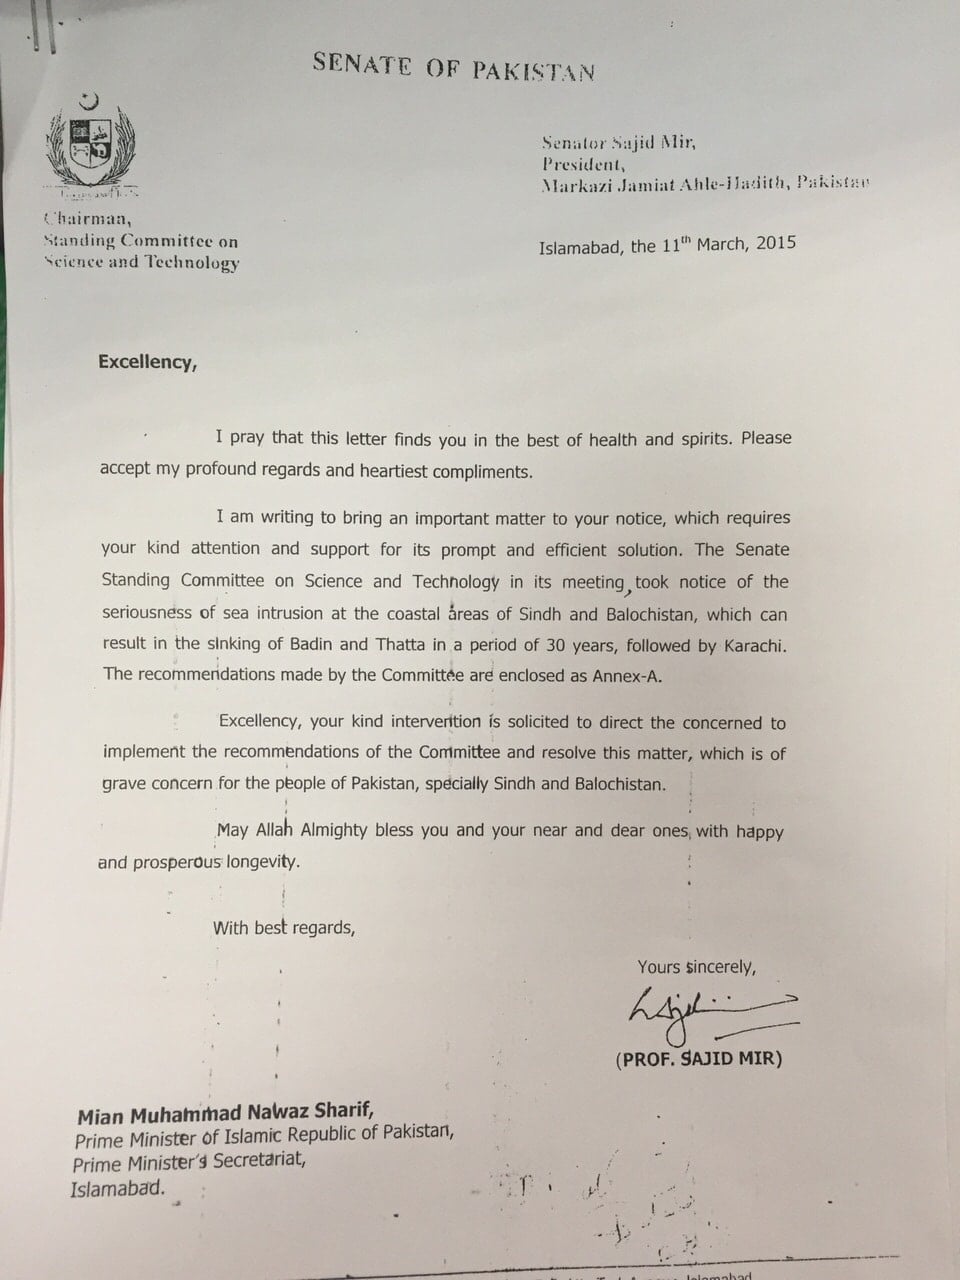 The letter recommends that the issue should be forwarded to the Council of Common Interests (CCI)